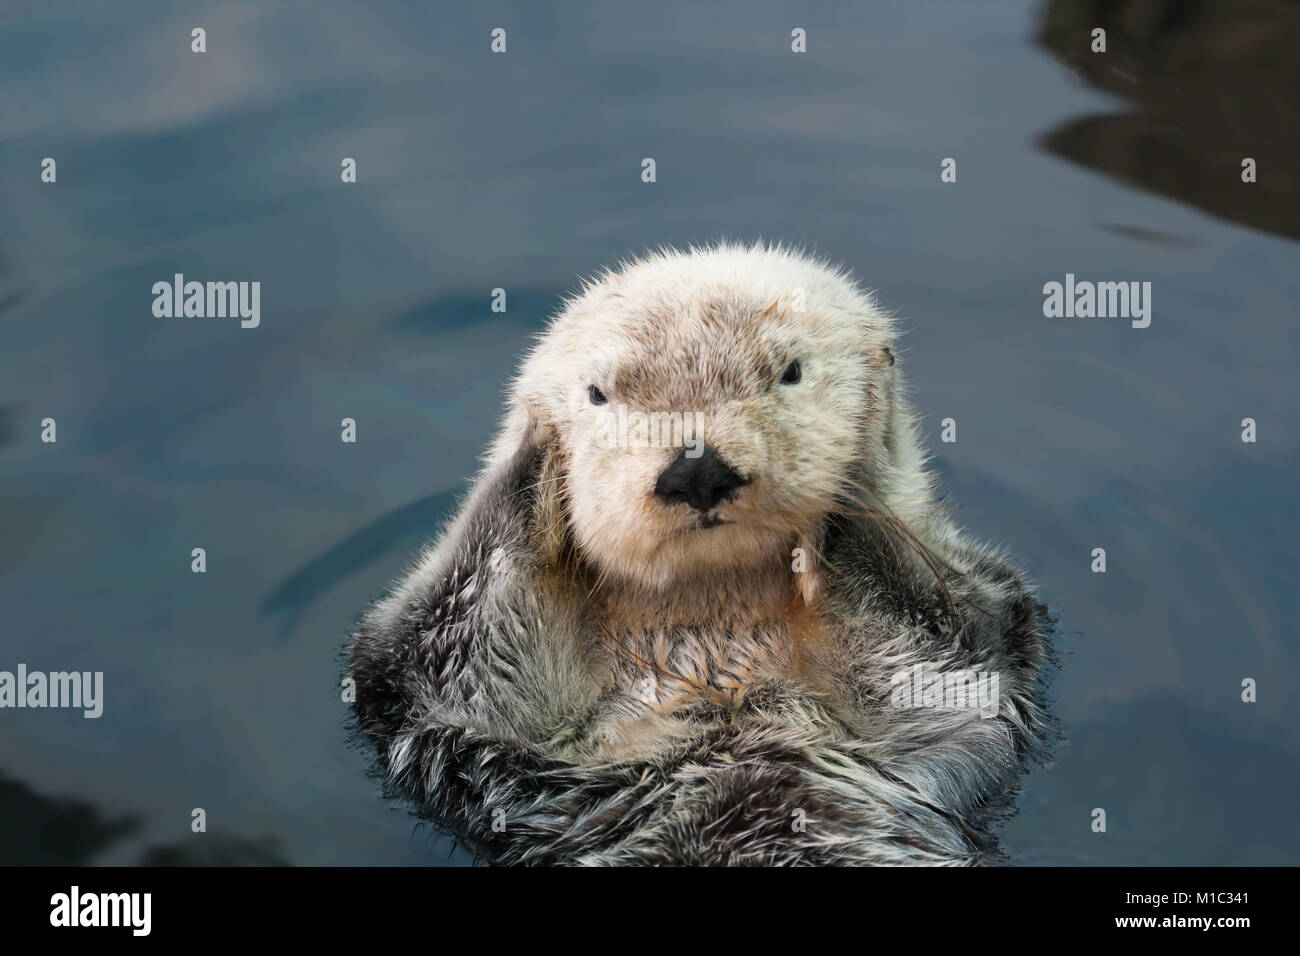 Sea otter floats on the back, close-up Stock Photo